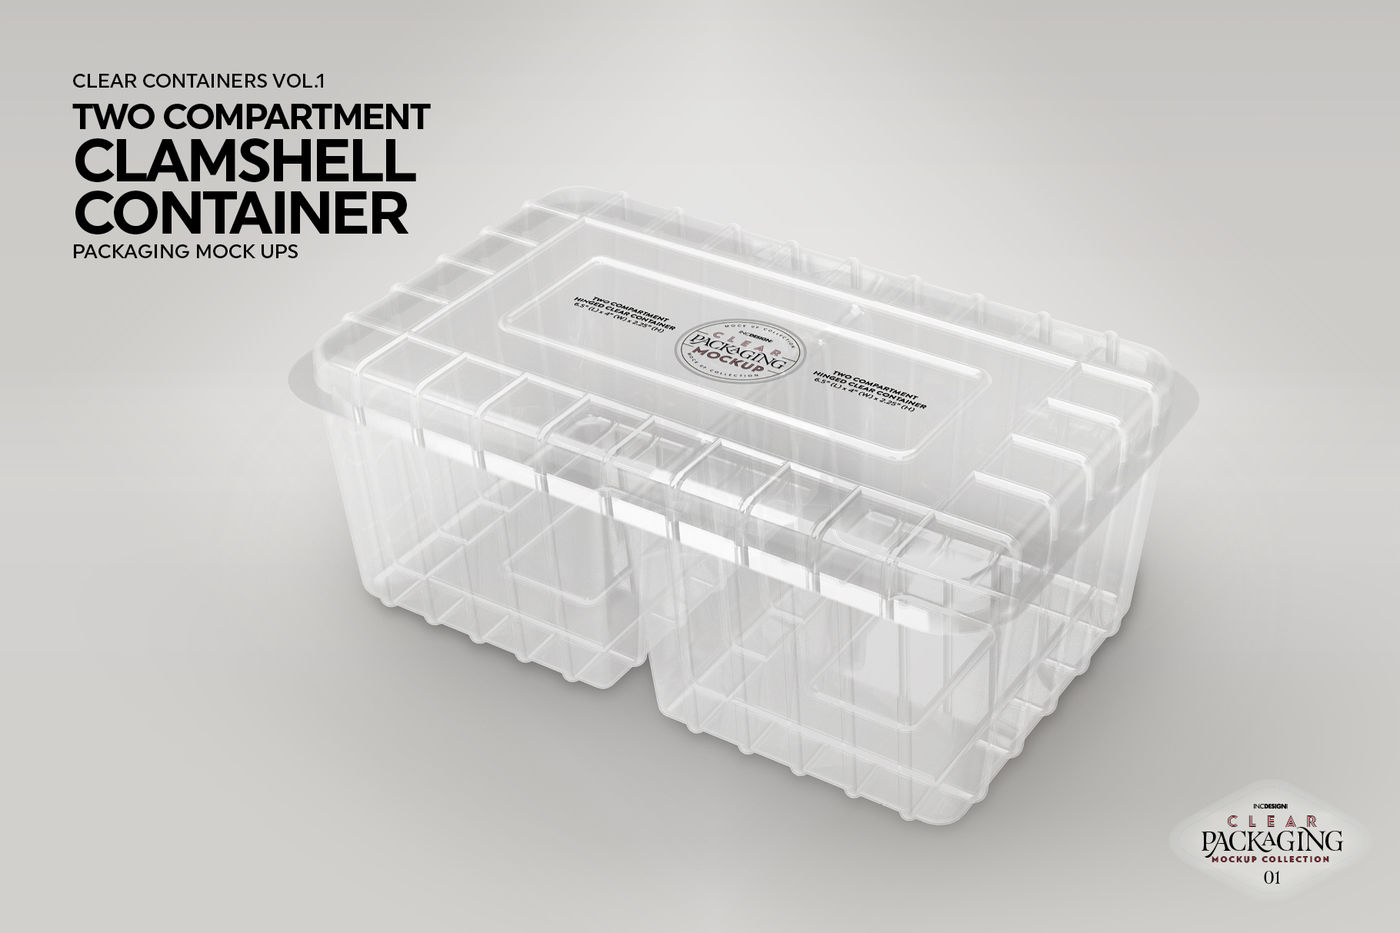 https://media1.thehungryjpeg.com/thumbs2/ori_40963_5efc162e654faffe5a33669c7a2d151487d4ae5e_vol-1-clear-plastic-food-containers-packaging-mock-up-collection.jpg